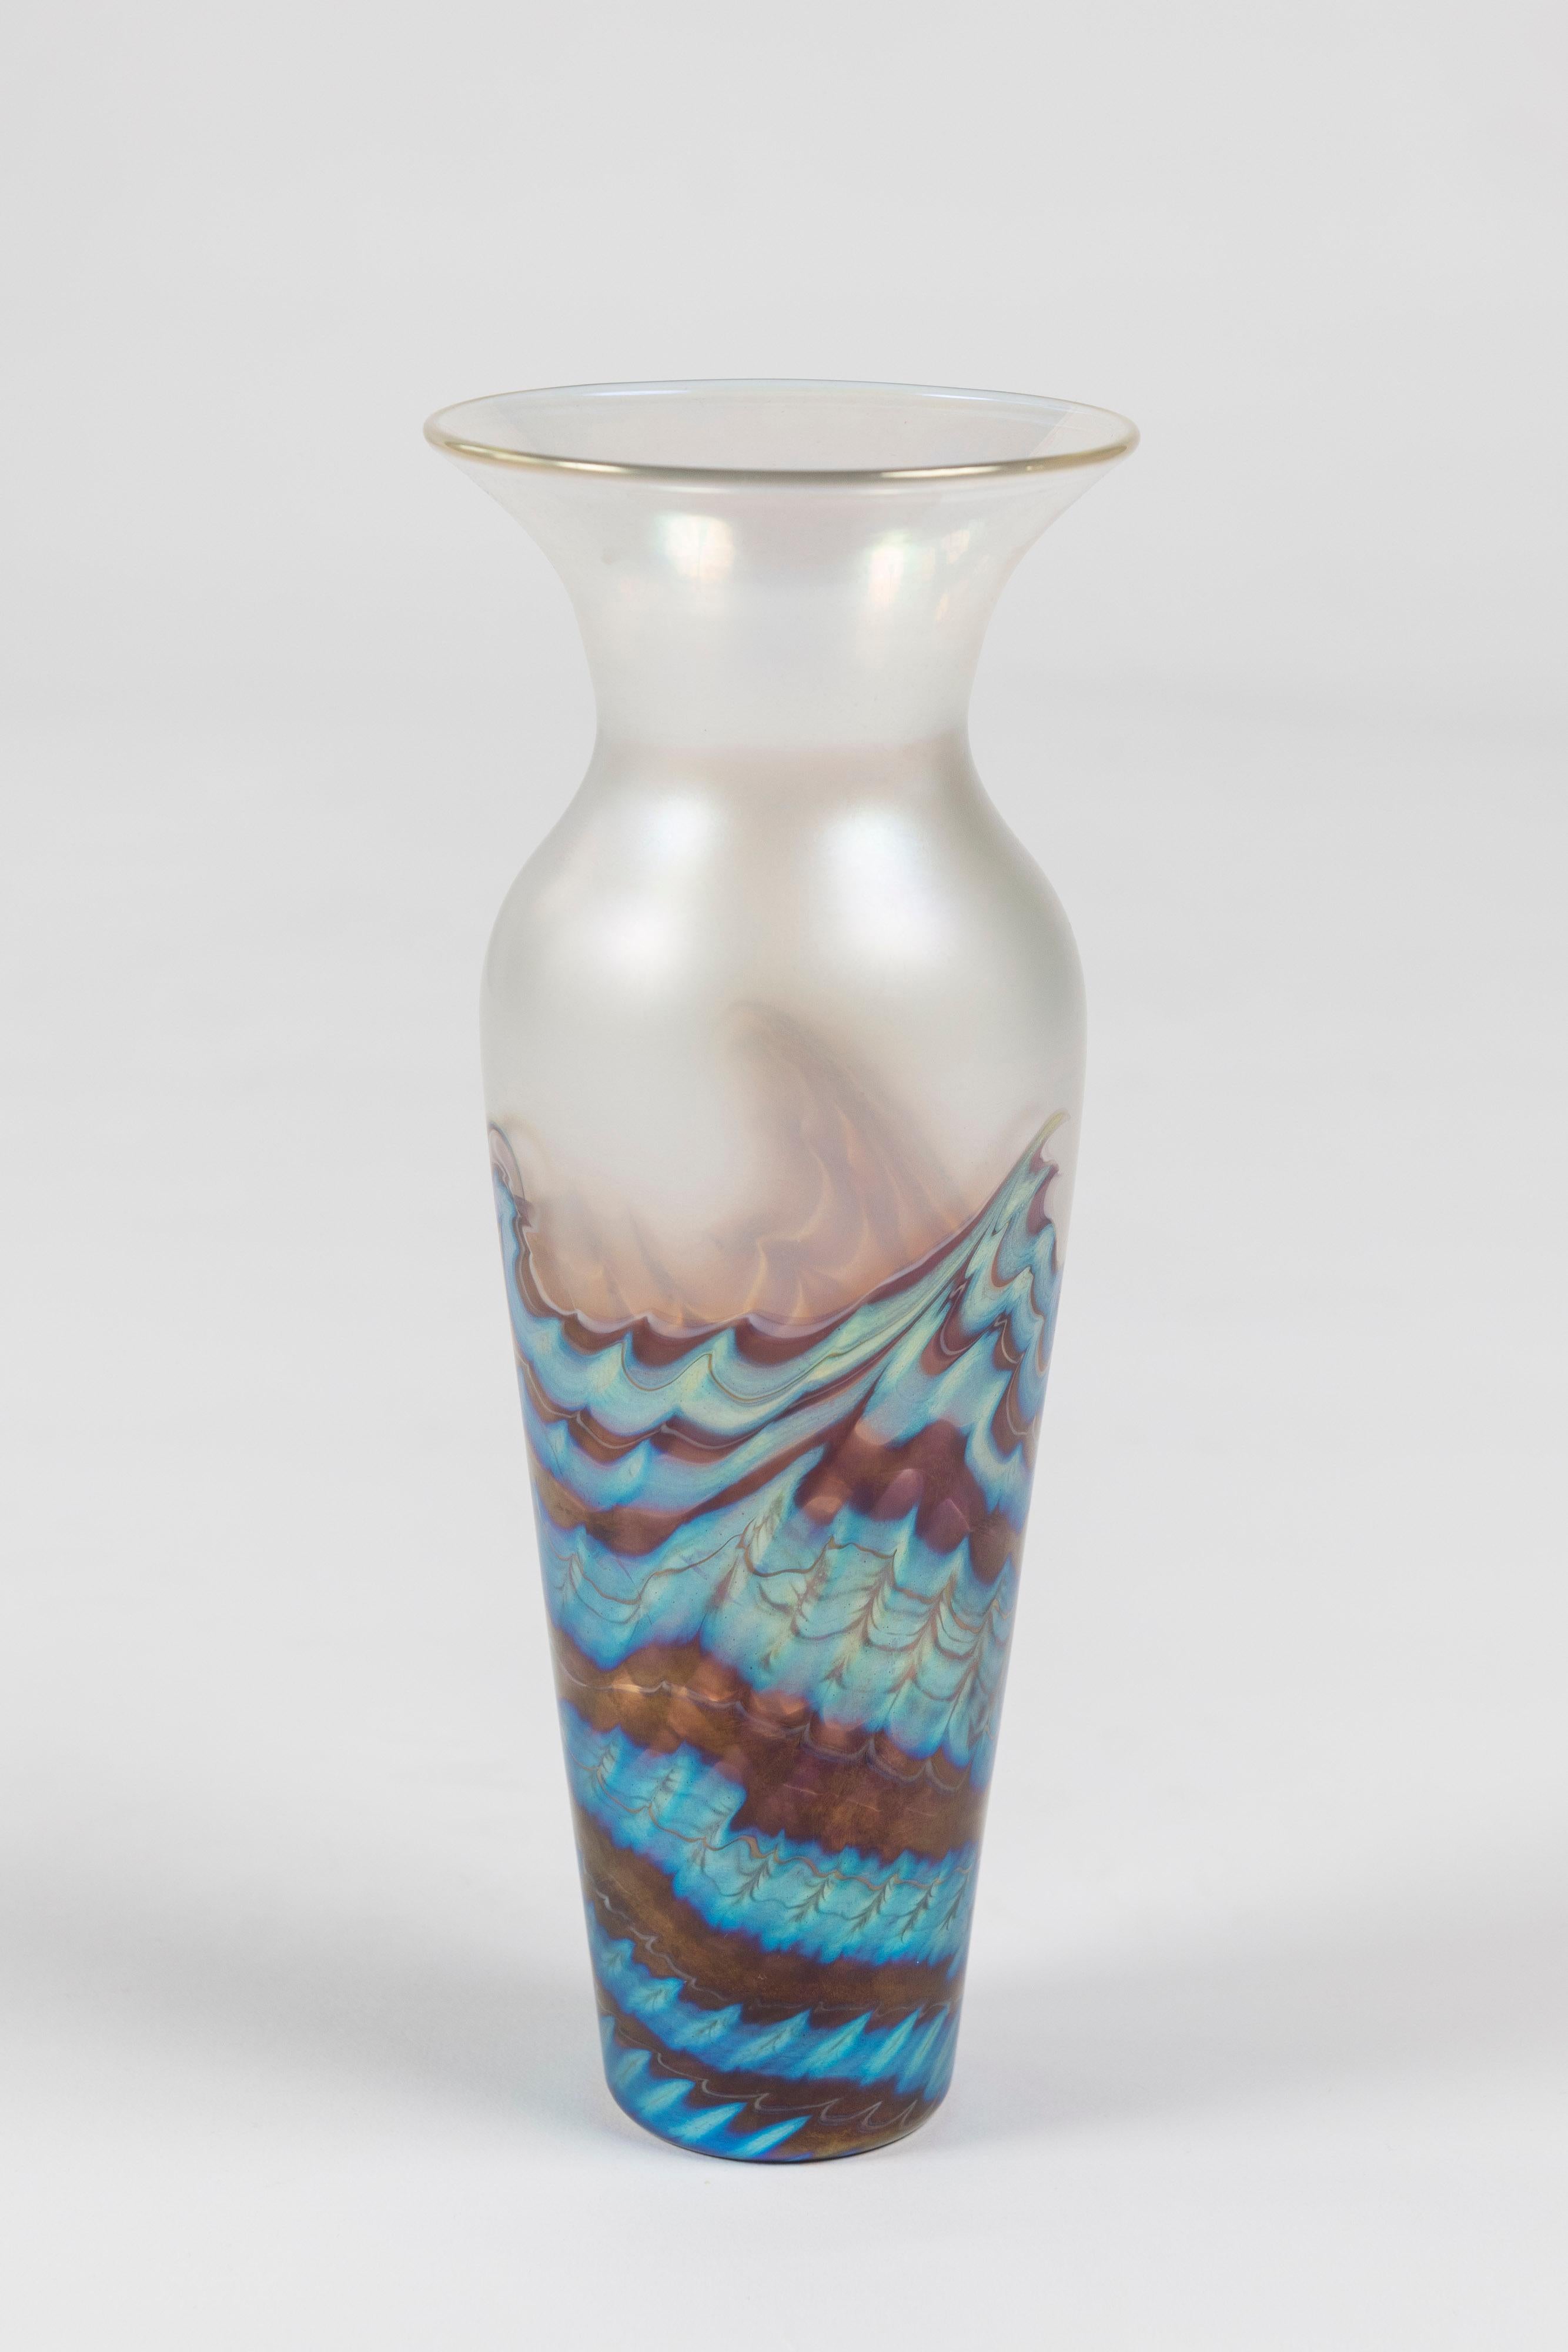 Lovely opalescent wave pattern tapered rim art glass vase by Lundberg Studios, is made in California and signed. Beautiful on its own or in a grouping.